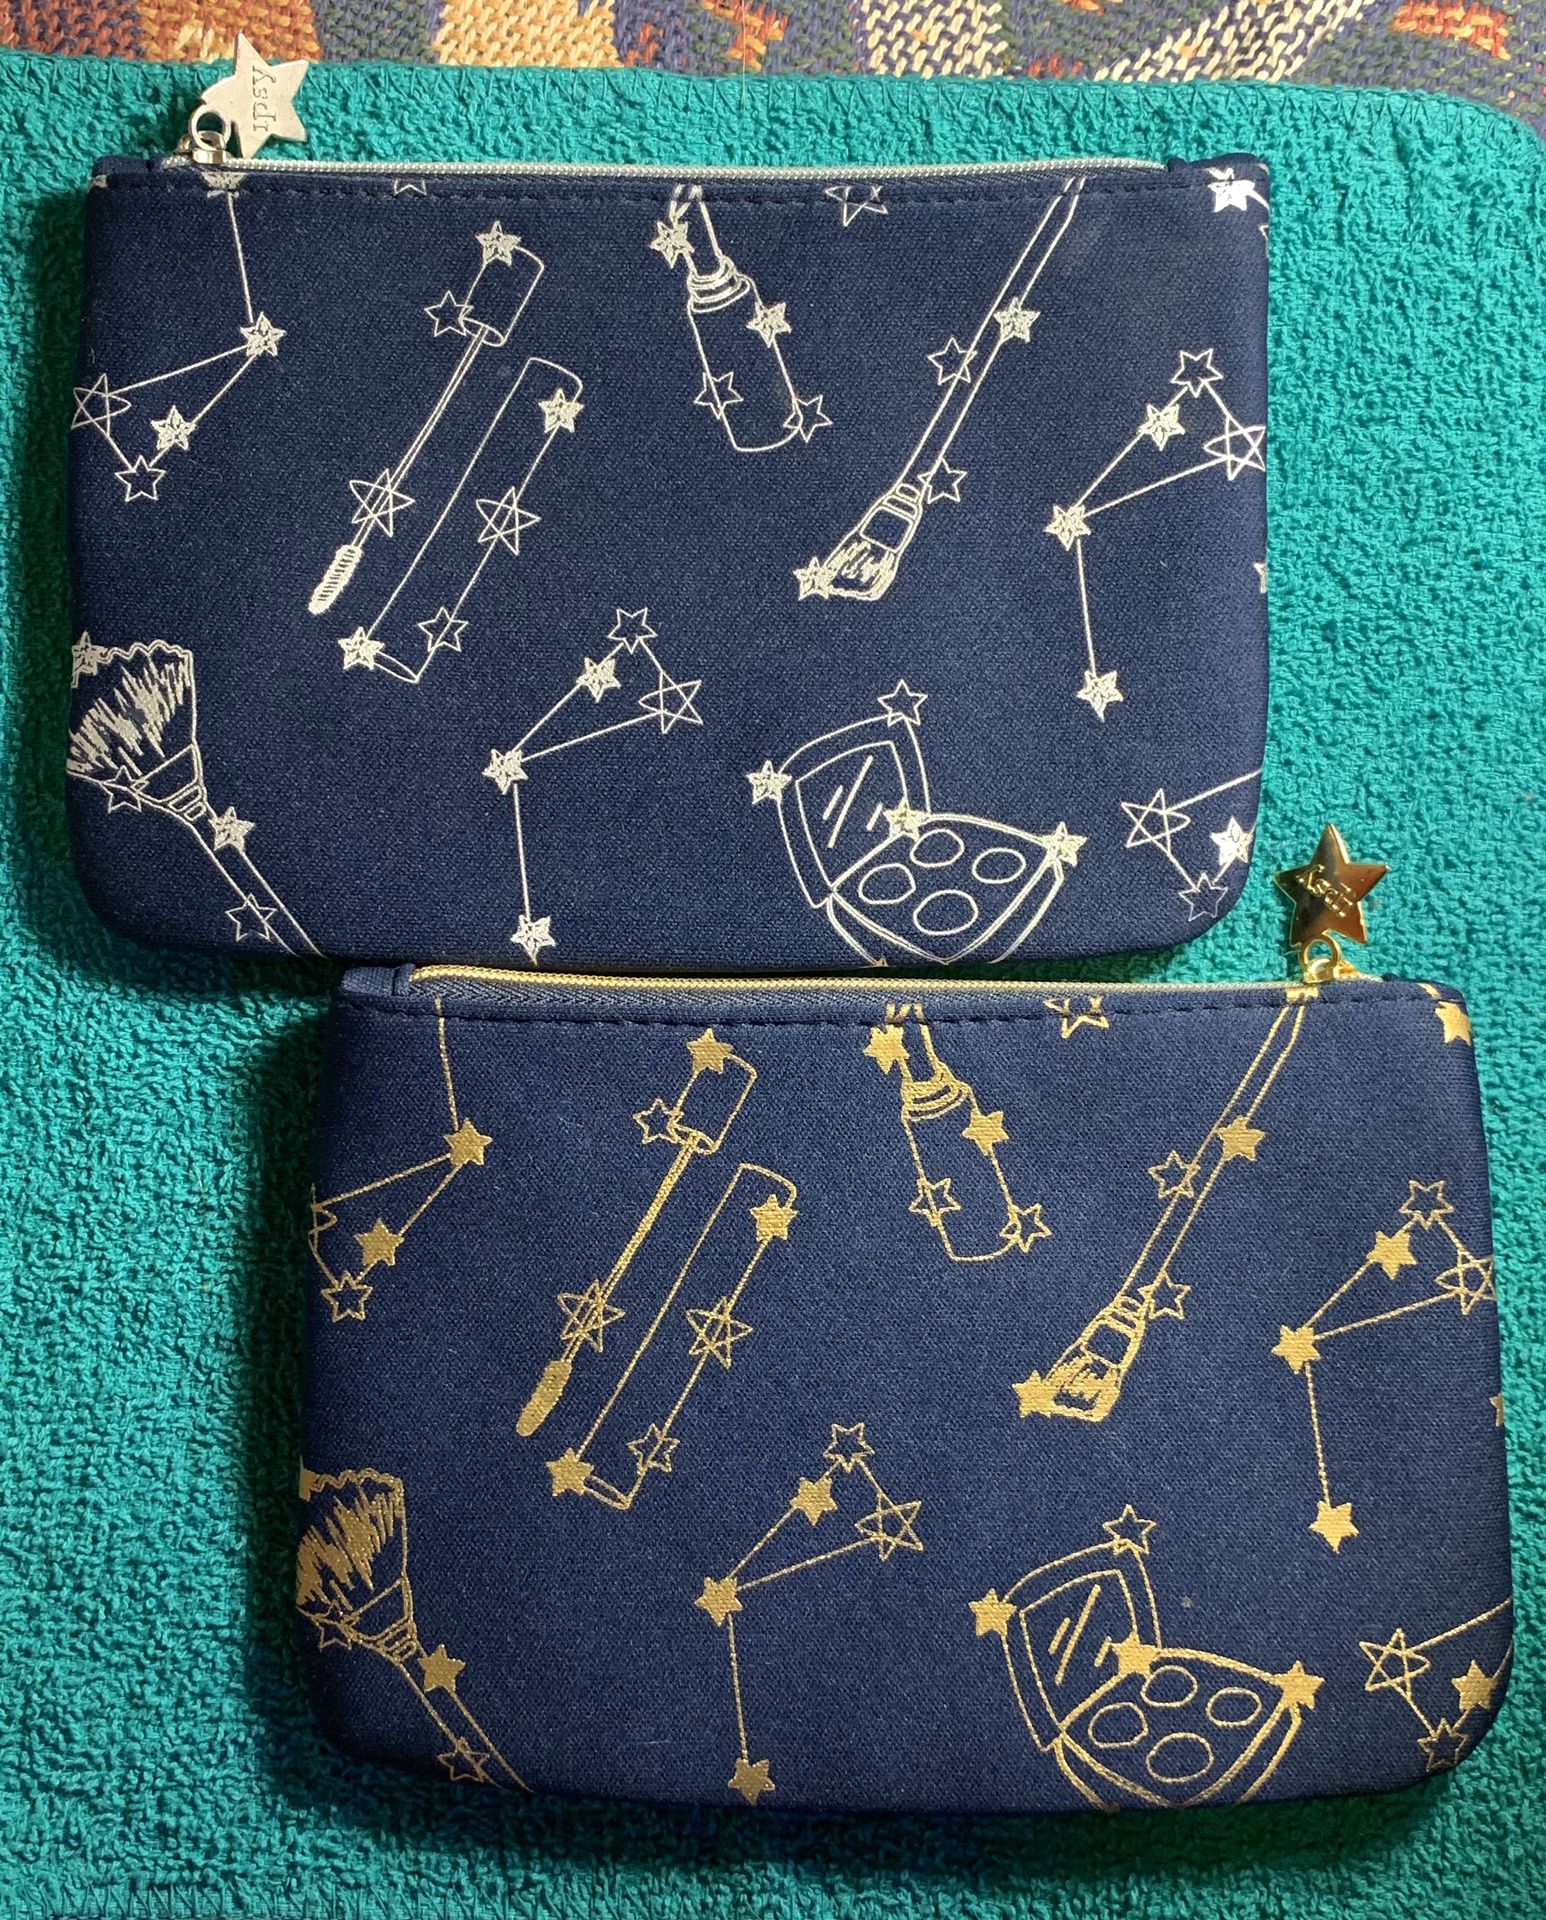 (2) Ipsy Constellation Makeup Bags - Navy & Gold/Silver